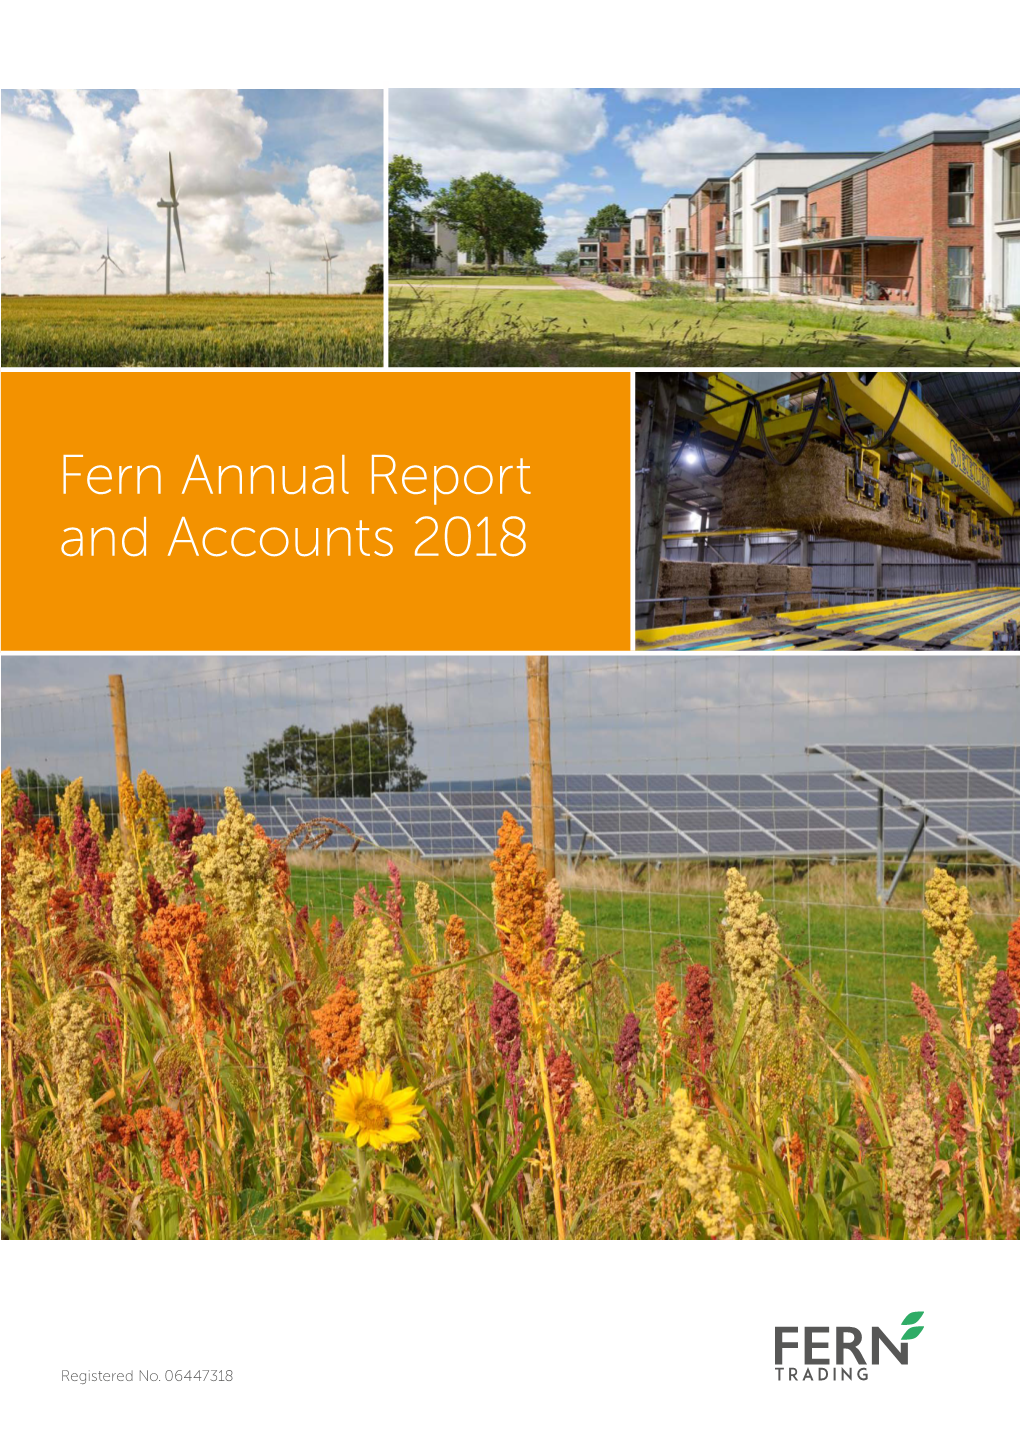 Fern Annual Report and Accounts 2018